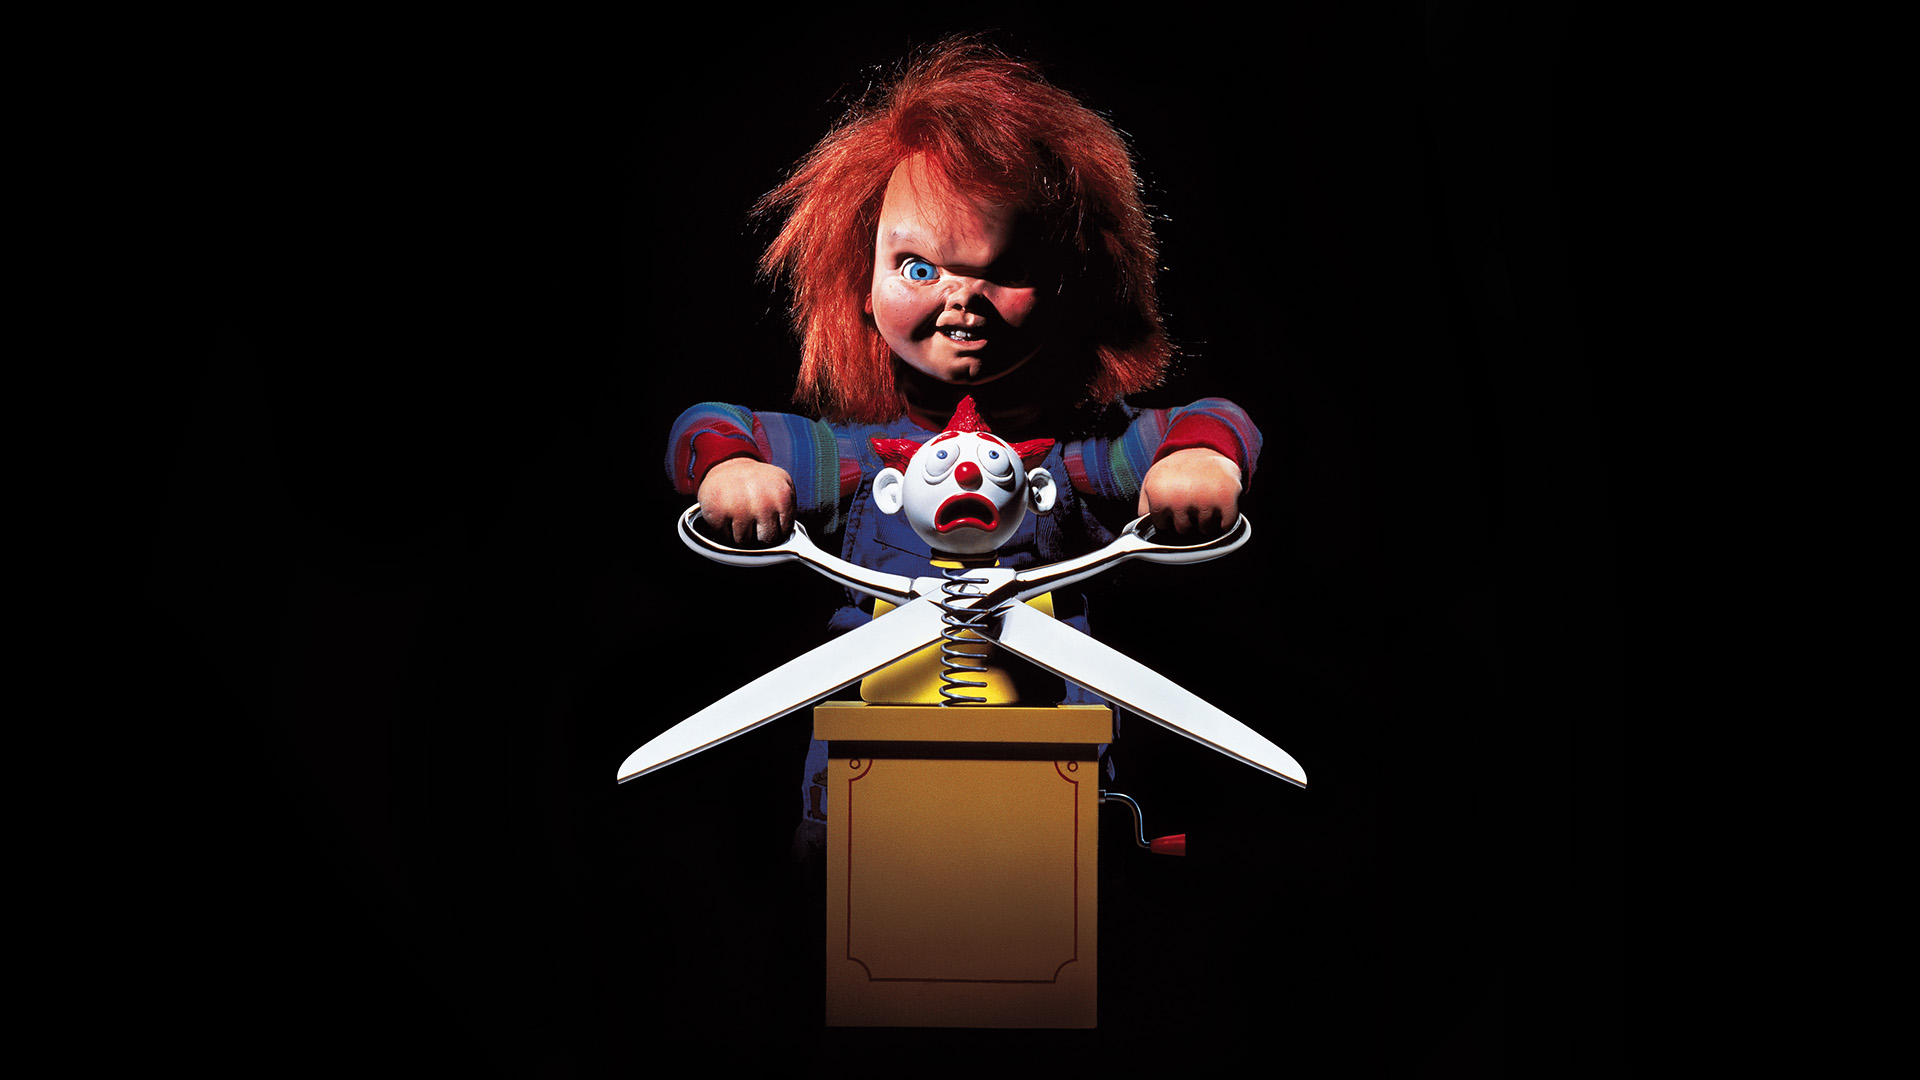 Child's Play 2 (1990) Review